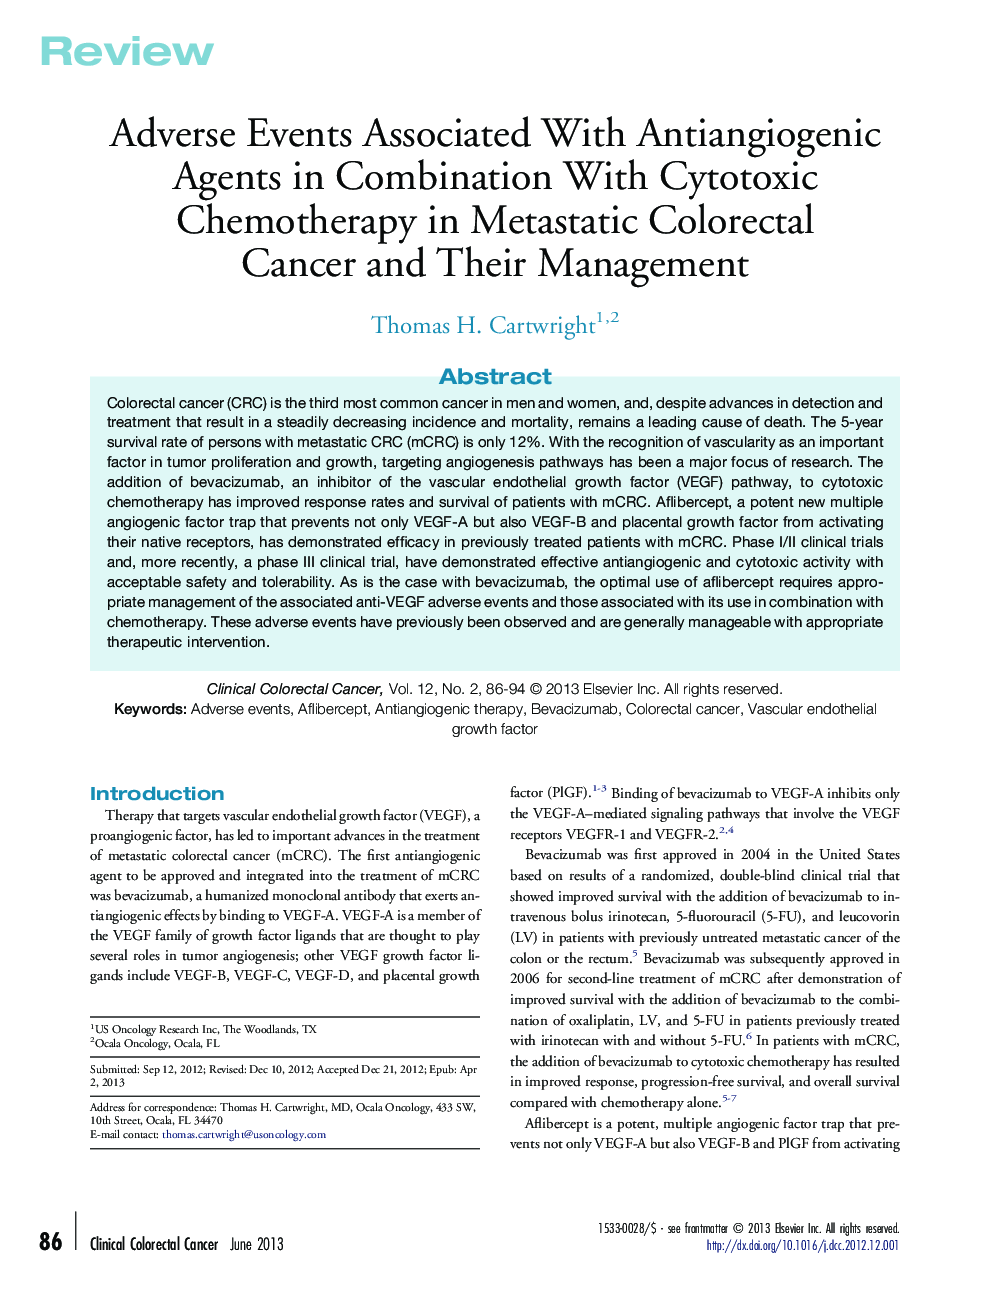 Adverse Events Associated With Antiangiogenic Agents in Combination With Cytotoxic Chemotherapy in Metastatic Colorectal Cancer and Their Management